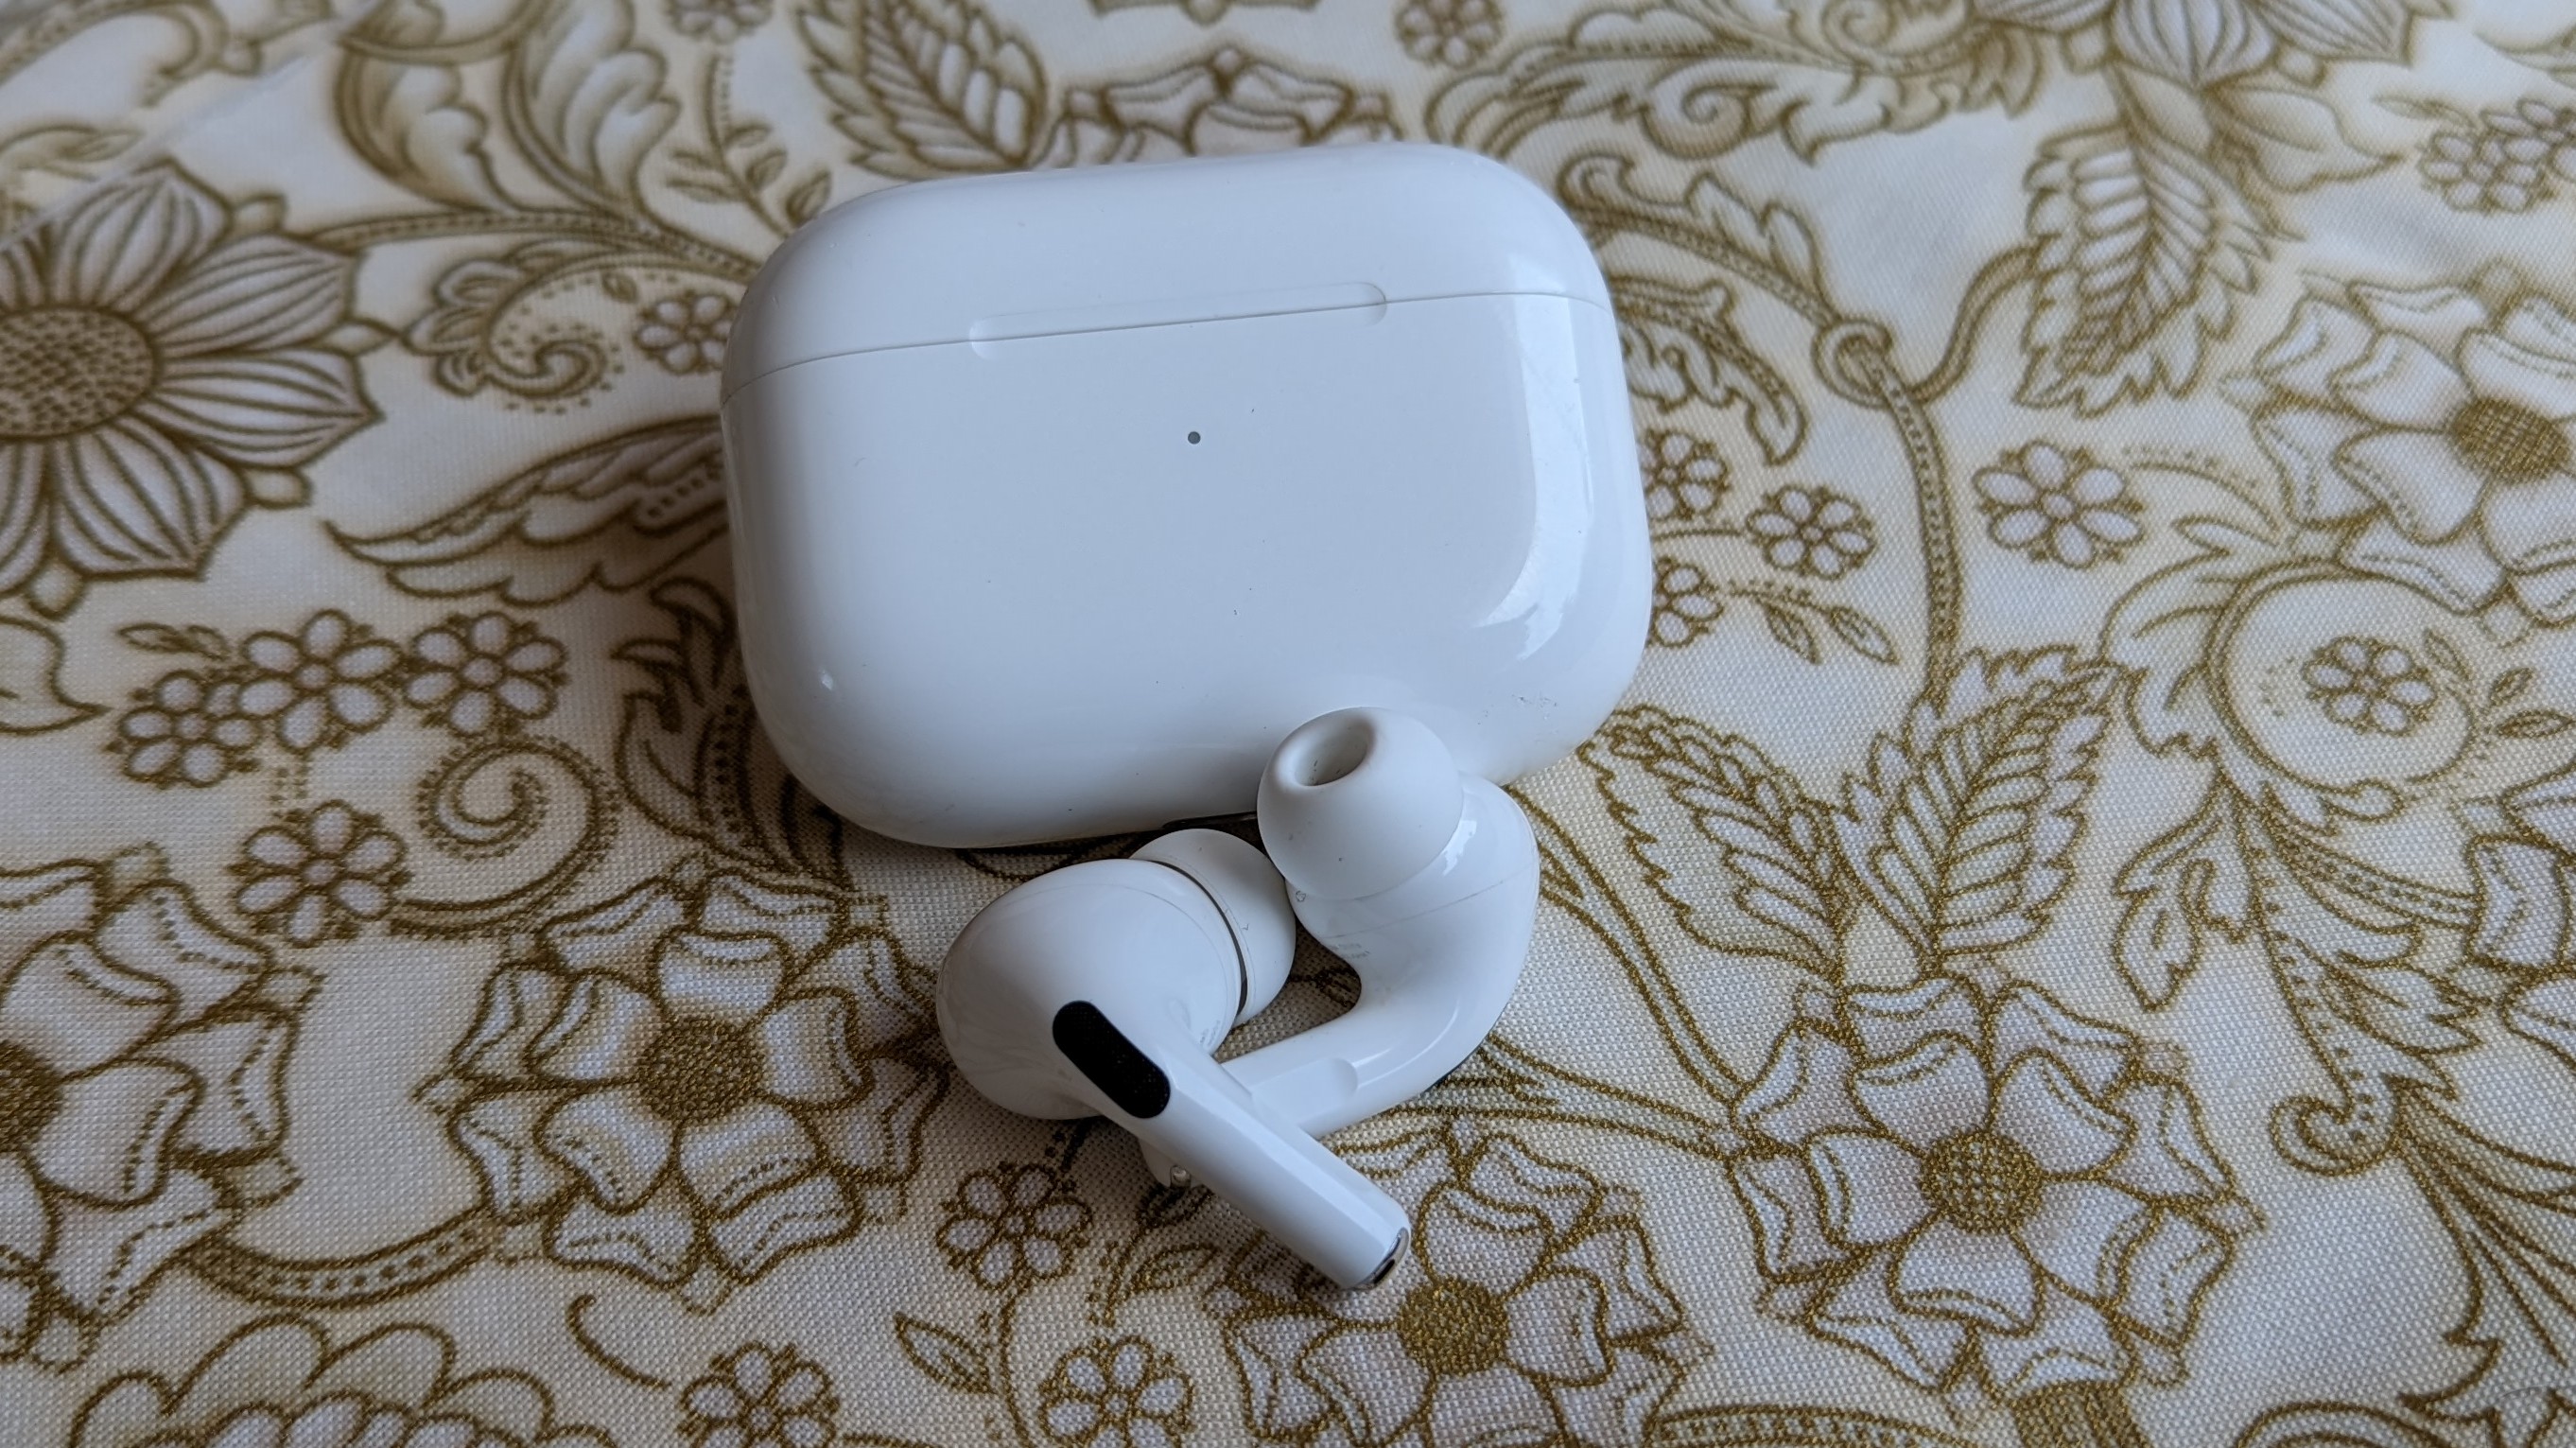 The AirPods Pro displayed on a white and gold cloth